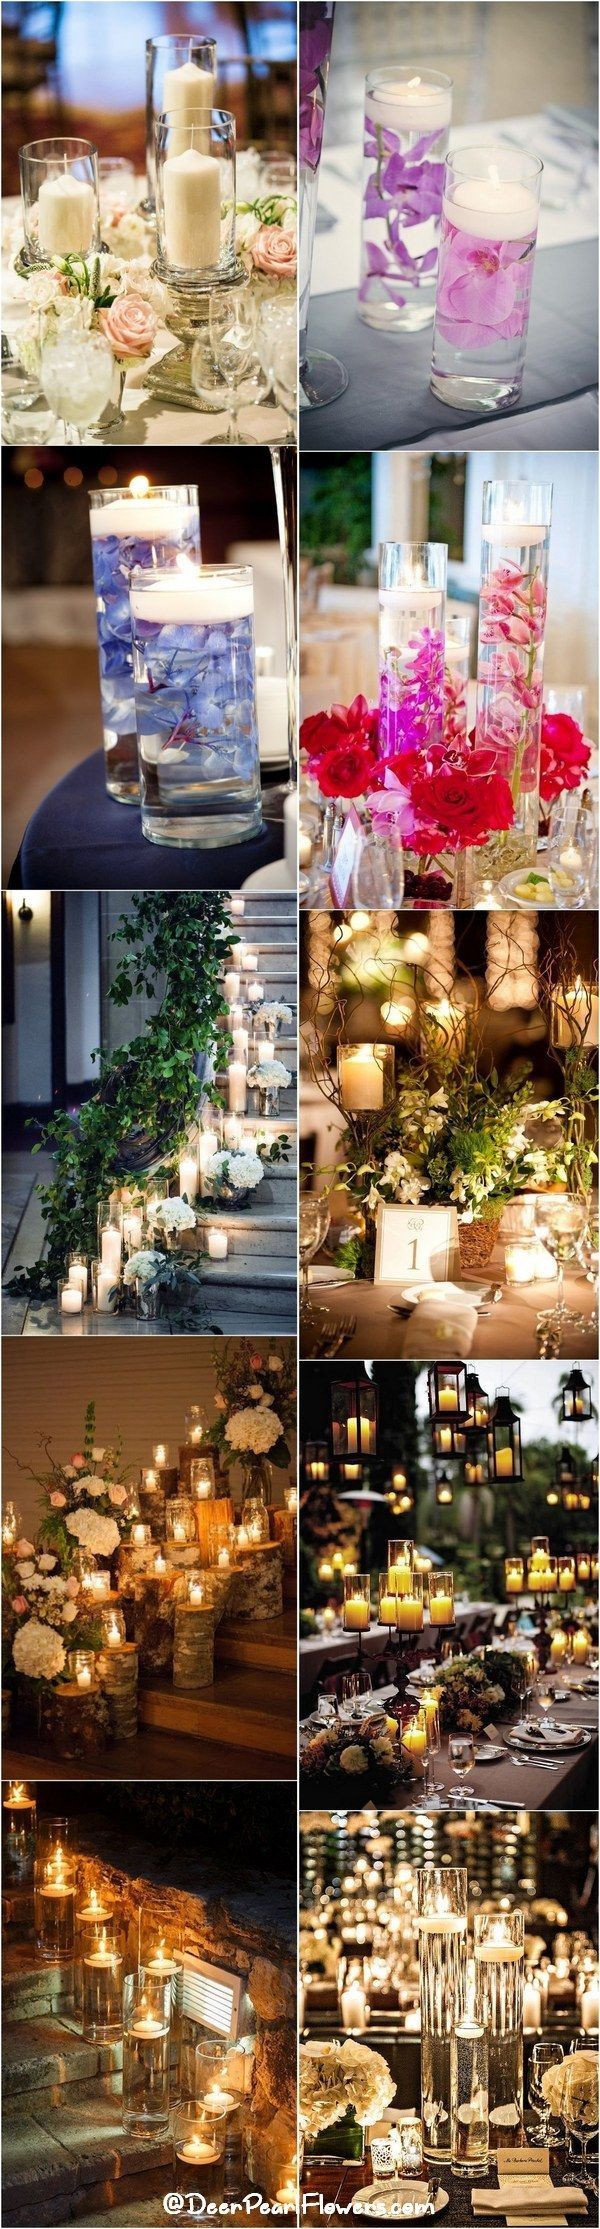 20 Awesome Tall Square Vase Wedding Centerpieces 2024 free download tall square vase wedding centerpieces of ideas for wedding centerpiece elegant dsc h vases square centerpiece regarding ideas for wedding centerpiece inspirational wedding candle wedding cen